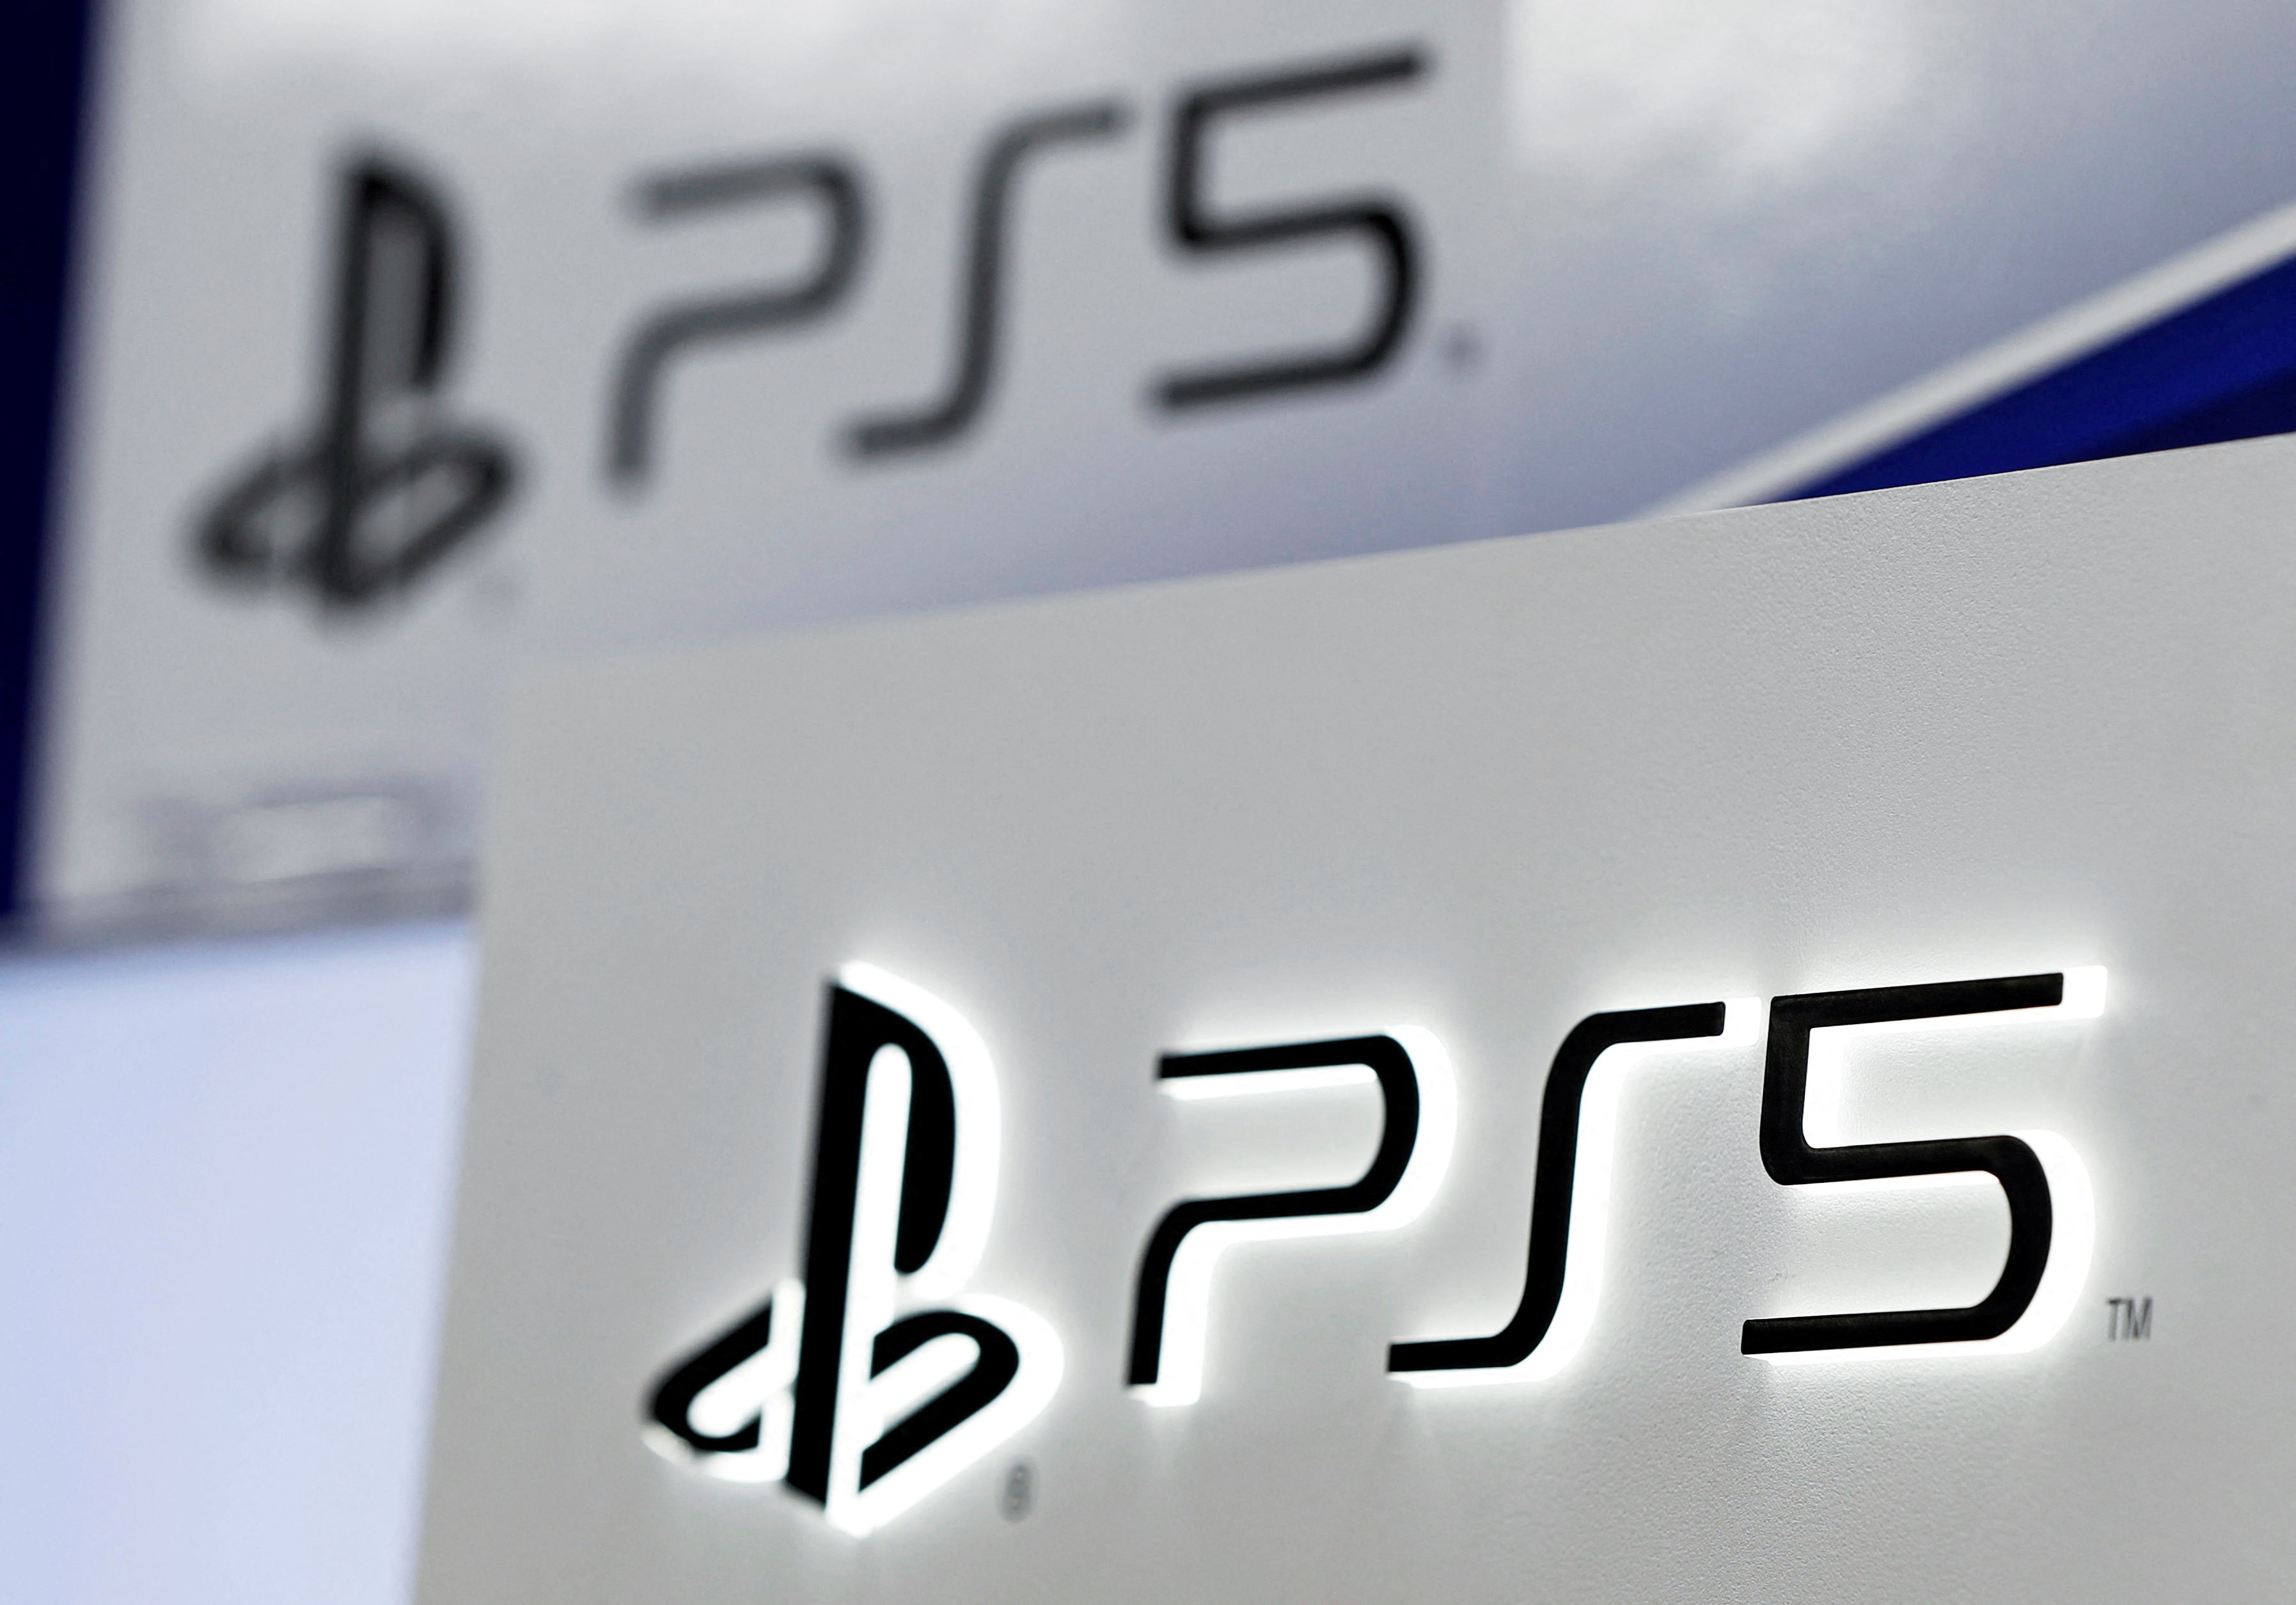 Sony has now sold over 40 million PlayStation 5 consoles since